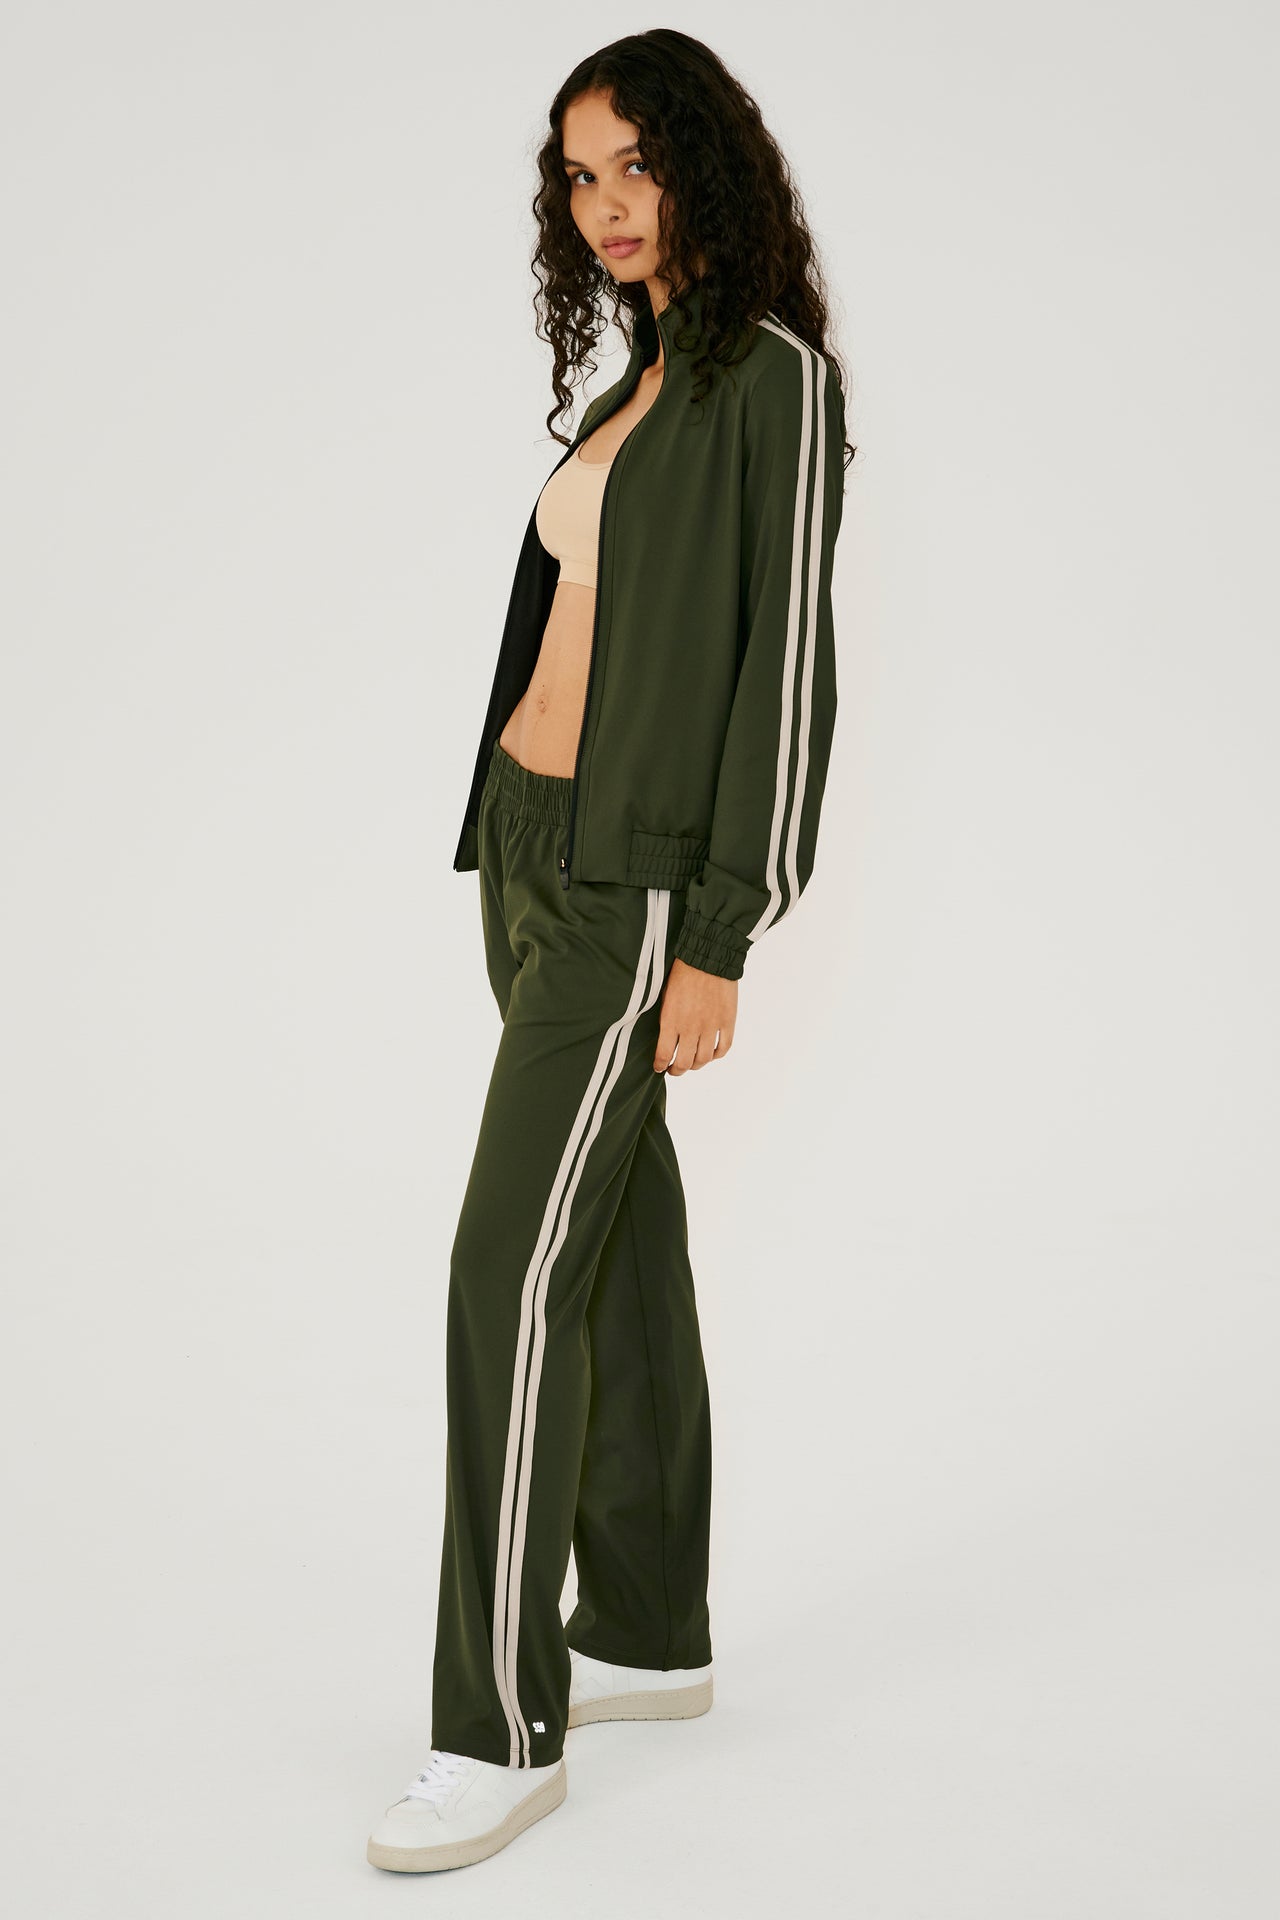 Full side view of girl wearing dark green zip jacket that stops under chin with two white stripes down the side and a dark green sweatpants with white shoes